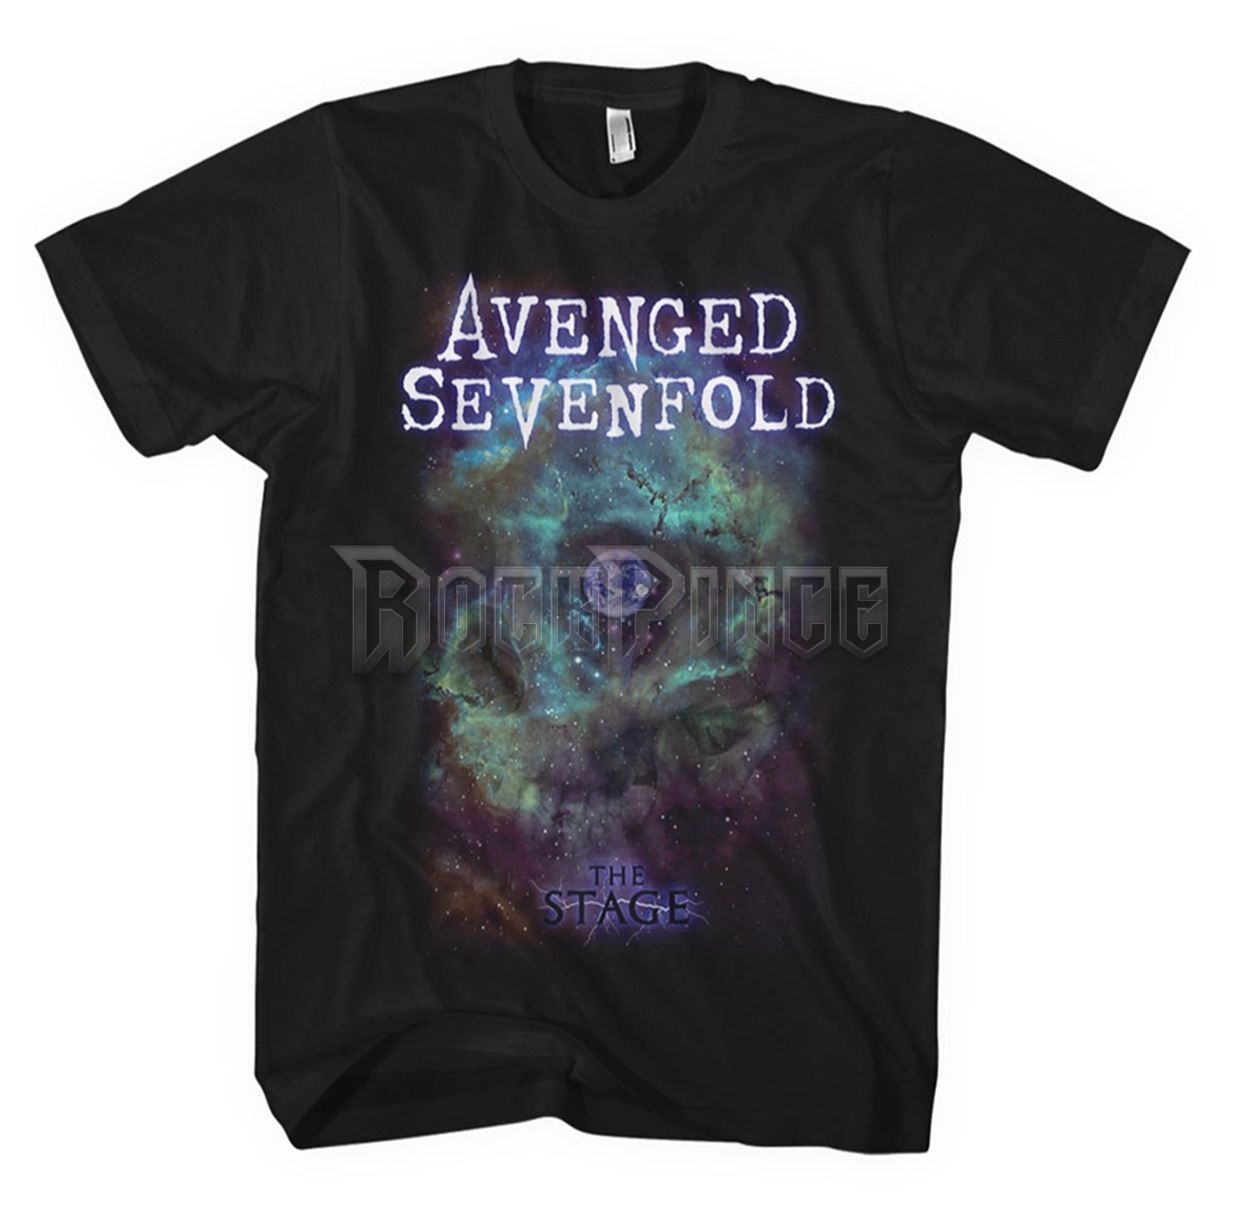 AVENGED SEVENFOLD - SPACE FACE - RTAVS010